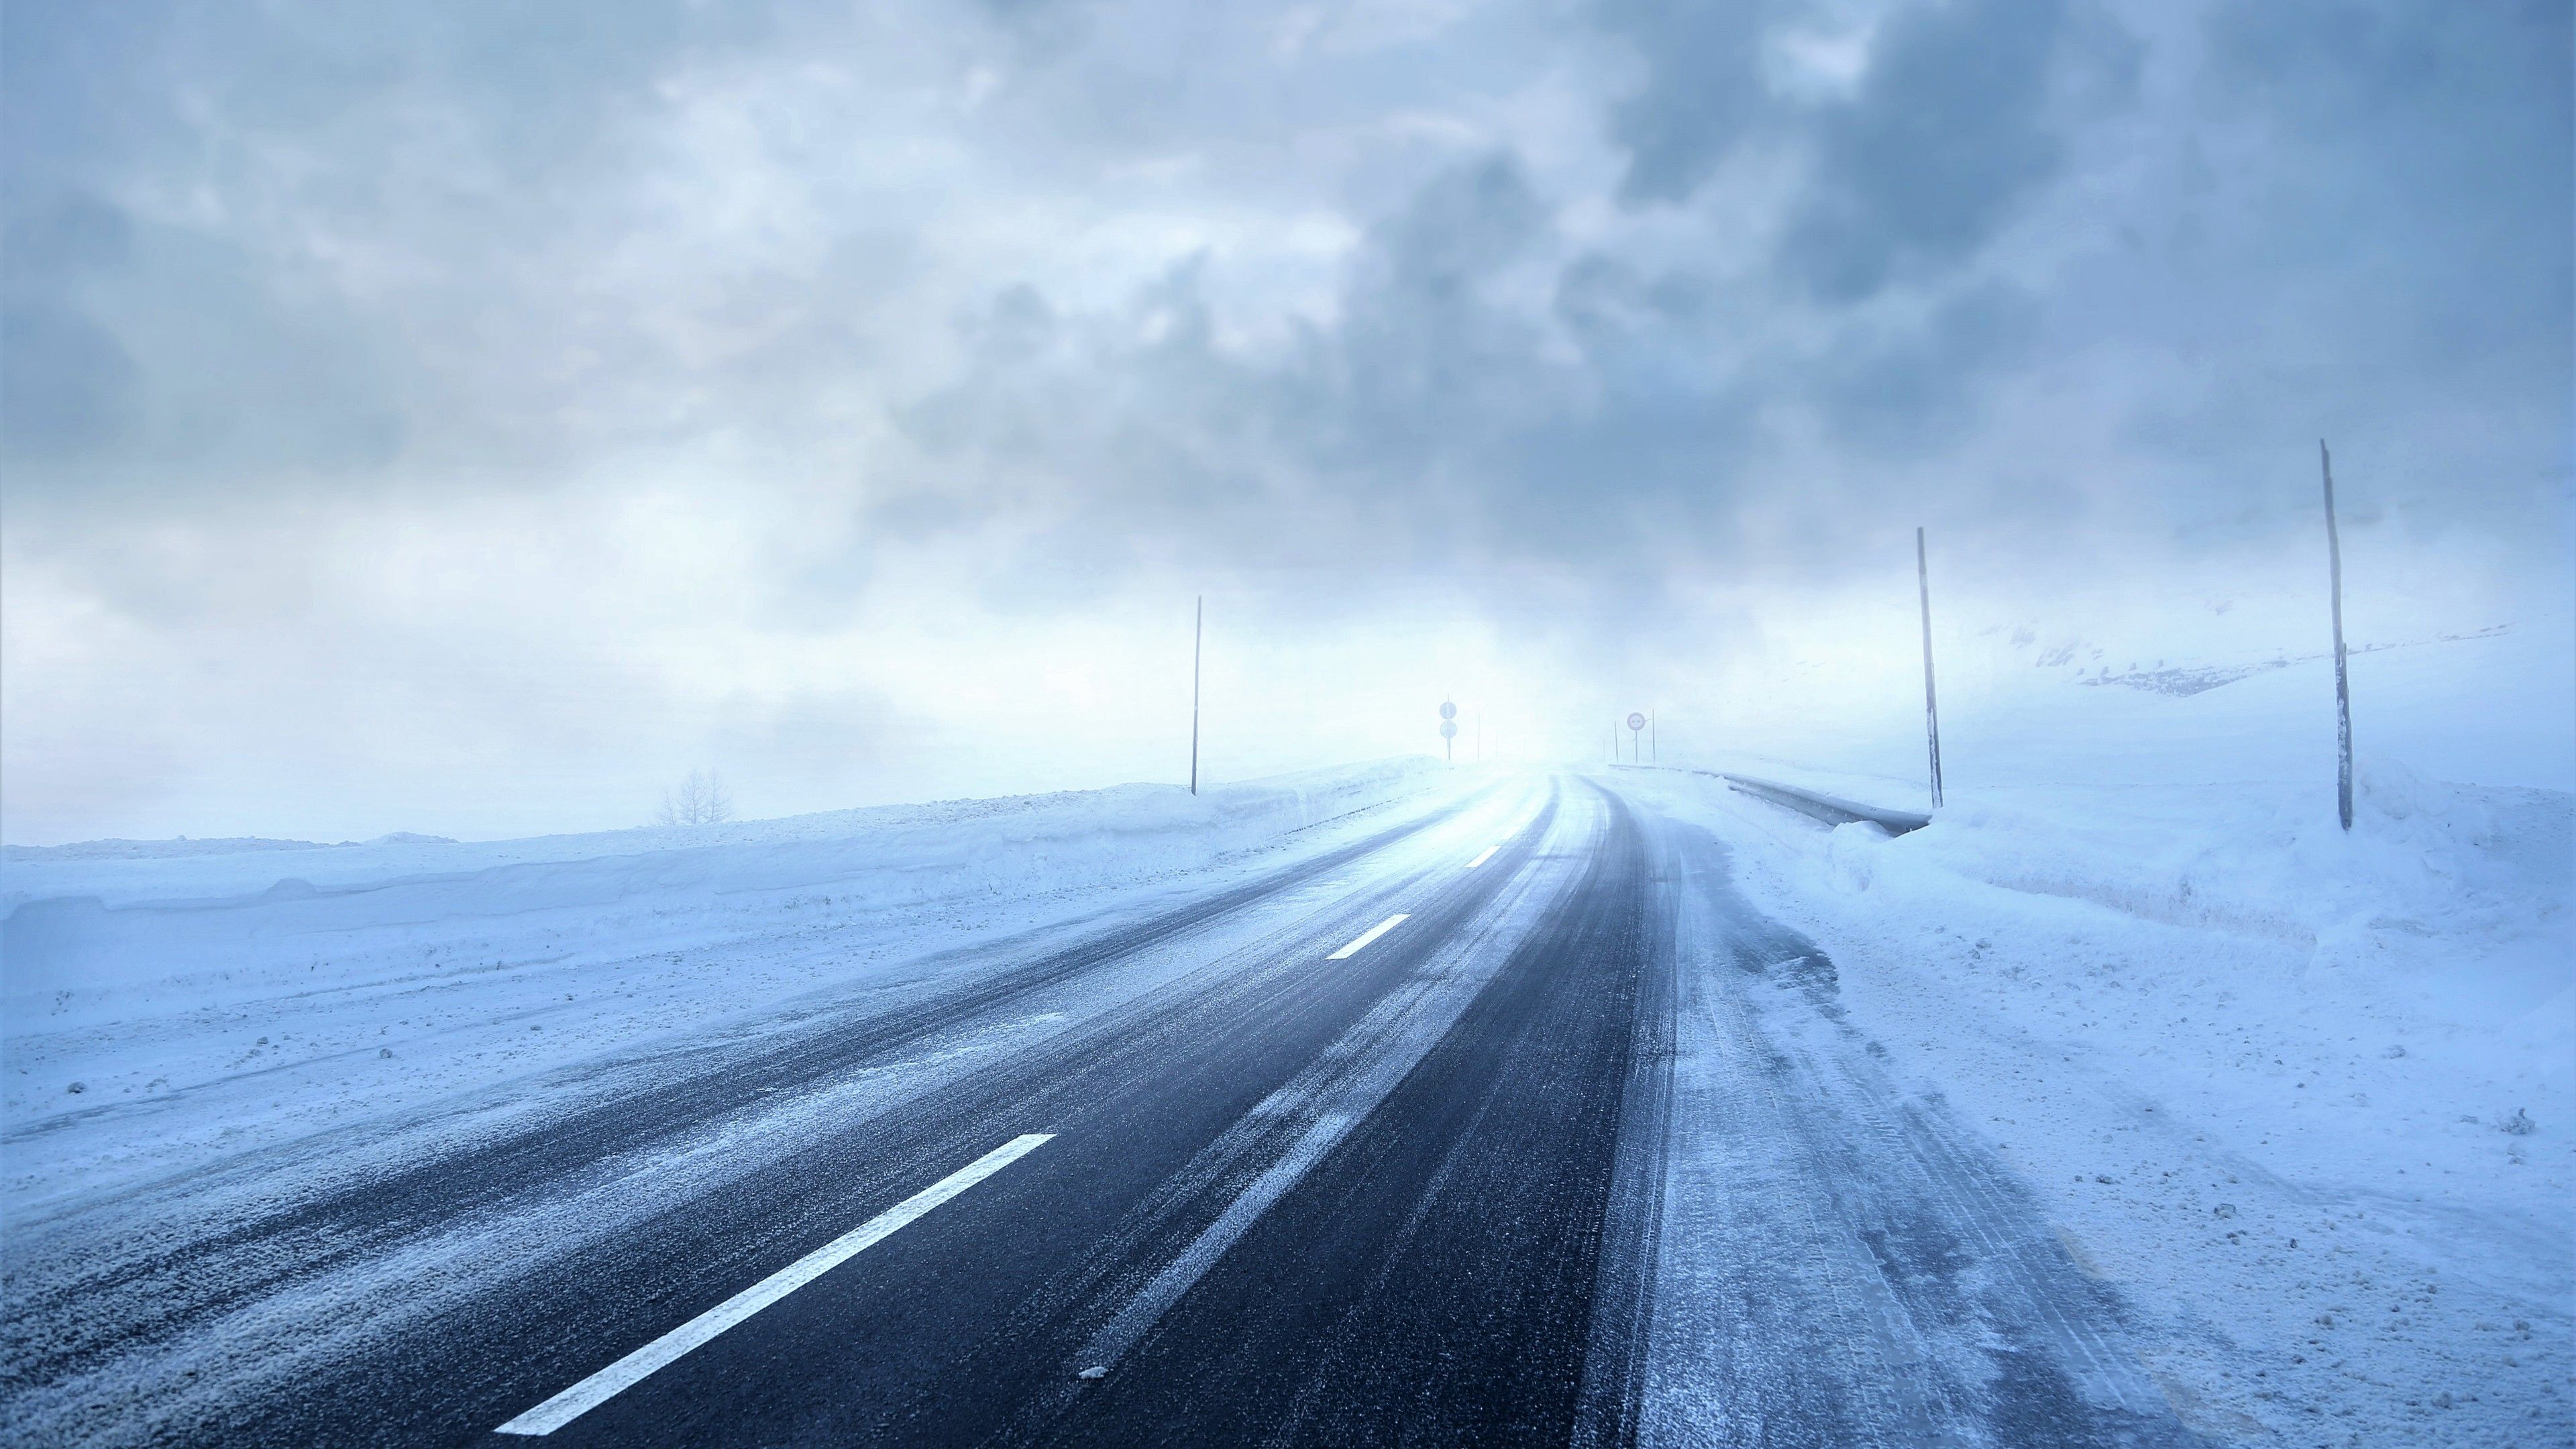 Wallpaper 4k Road Covered With Snow Storm Winter Season 4k 4k Wallpaper, 5k Wallpaper, Hd Wallpaper, Nature Wallpaper, Road Wallpaper, Snow Wallpaper, Storm Wallpaper, Winter Wallpaper